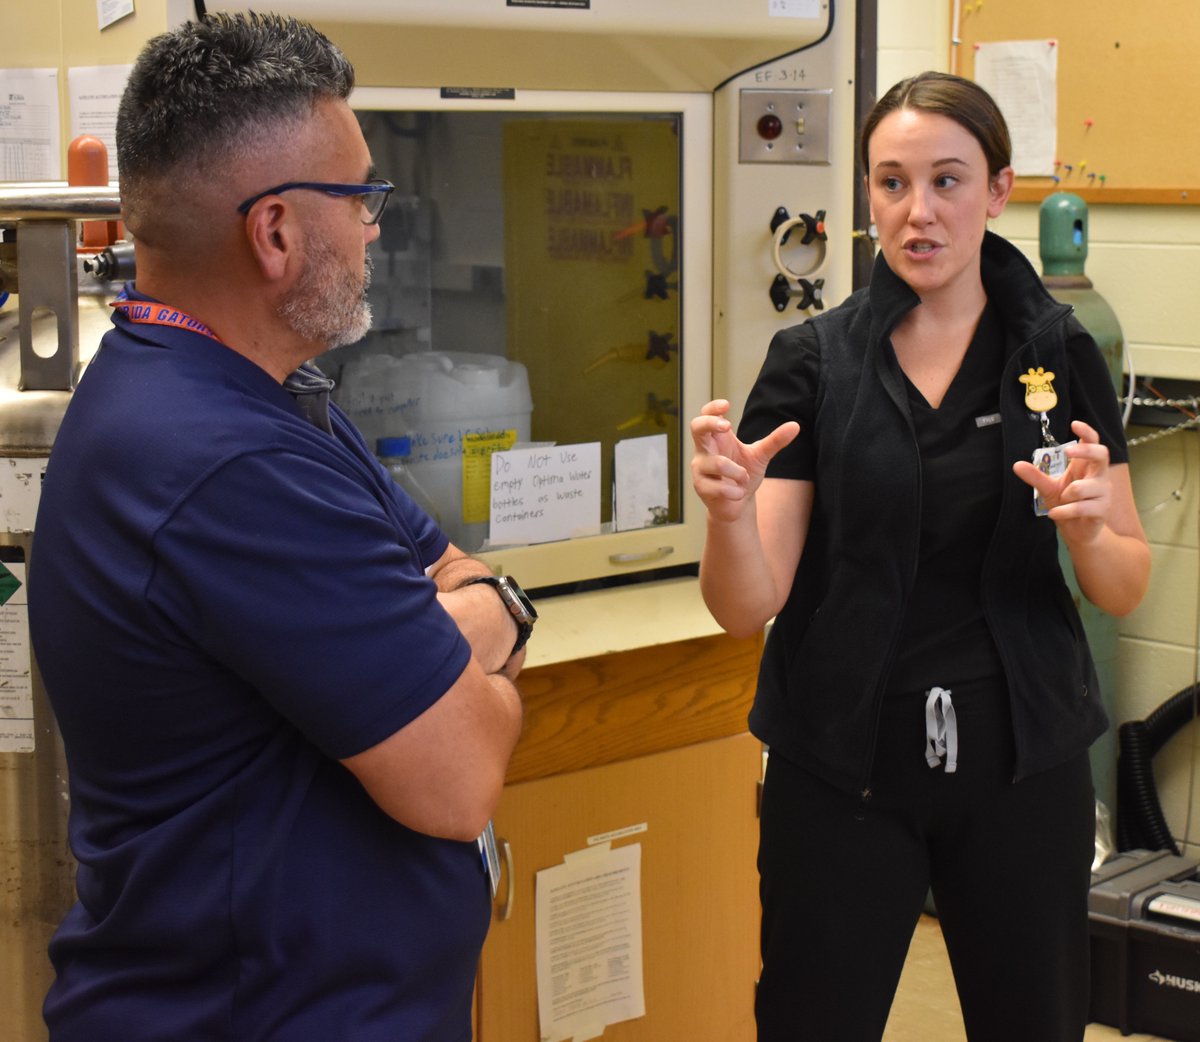 A team at @UFHealth is uncovering a connection with PFAS chemicals to heart defects in babies from Florida’s Panhandle. Led by charge nurse Alexandria Owens, they are making strides in identifying potential causes sparking hope for improved patient care. #NationalNursesWeek